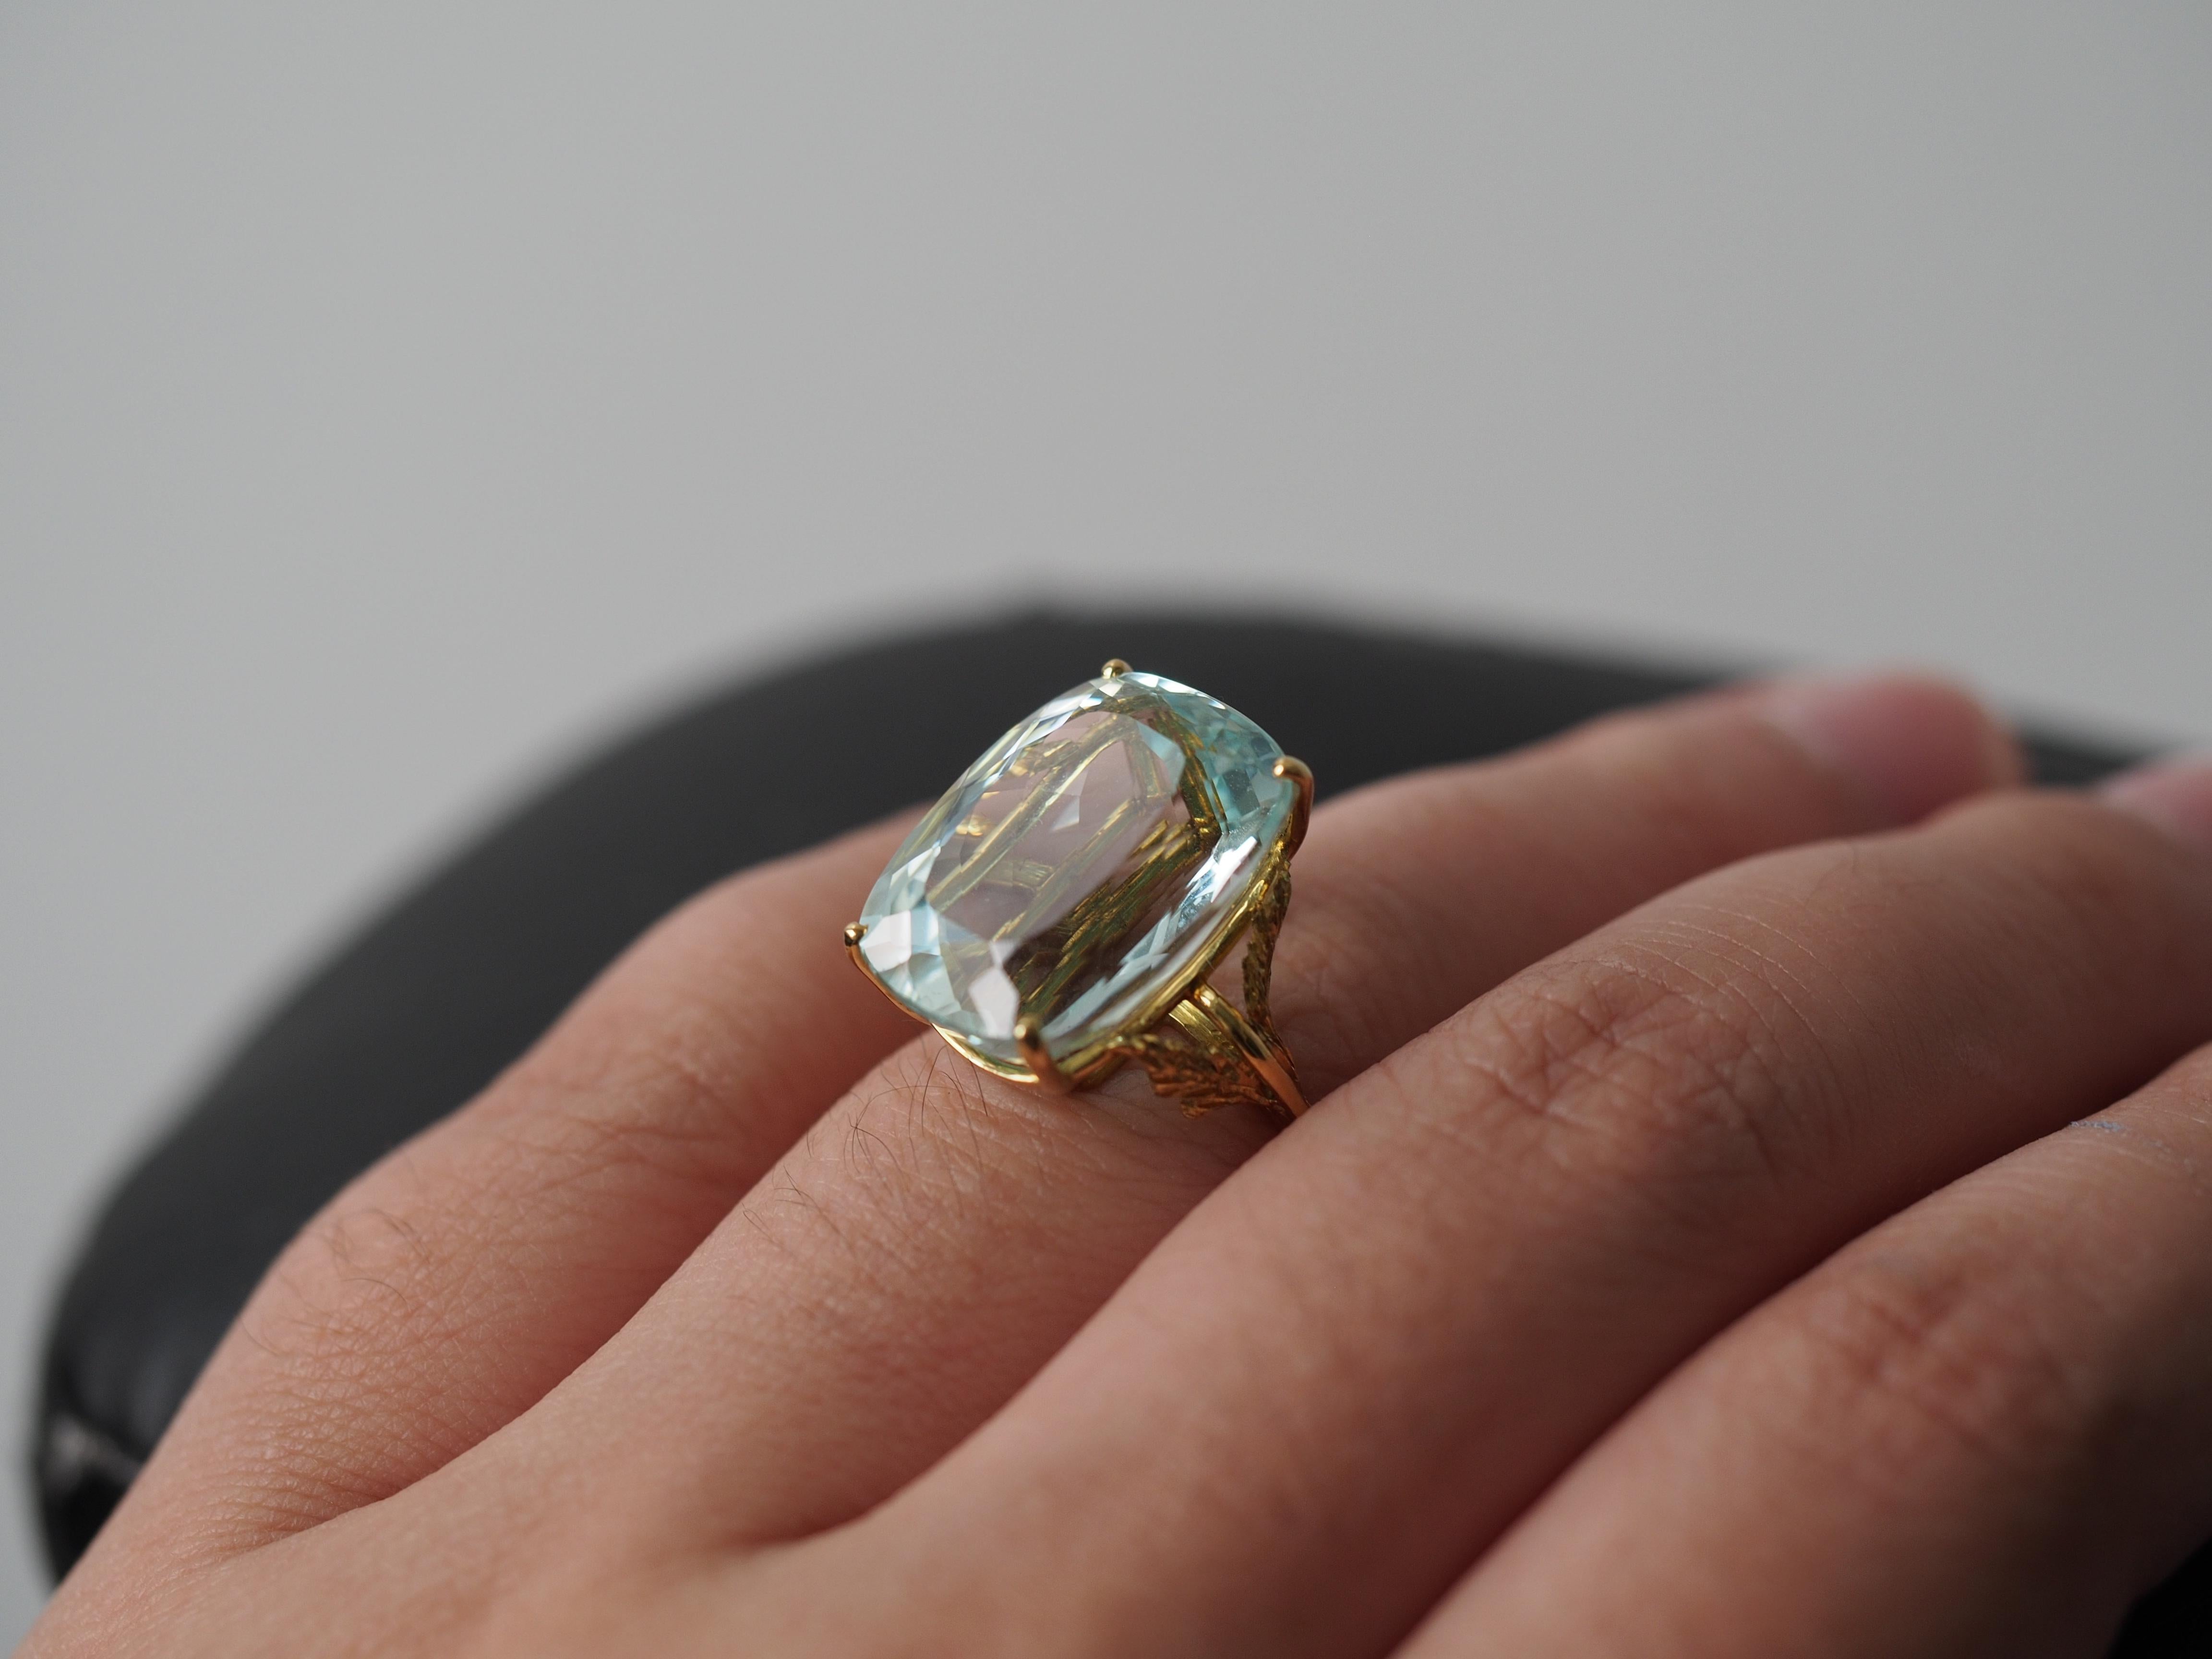 Year: 1960s

Item Details:
Ring Size: 7
Metal Type: 18k Yellow Gold [Hallmarked, and Tested]
Weight: 7.67 grams

Aquamarine Details:

GIA Report Number:1226950692

Natural Aquamarine, Green-Blue Color, Cushion Shape

17.00ct Approximate